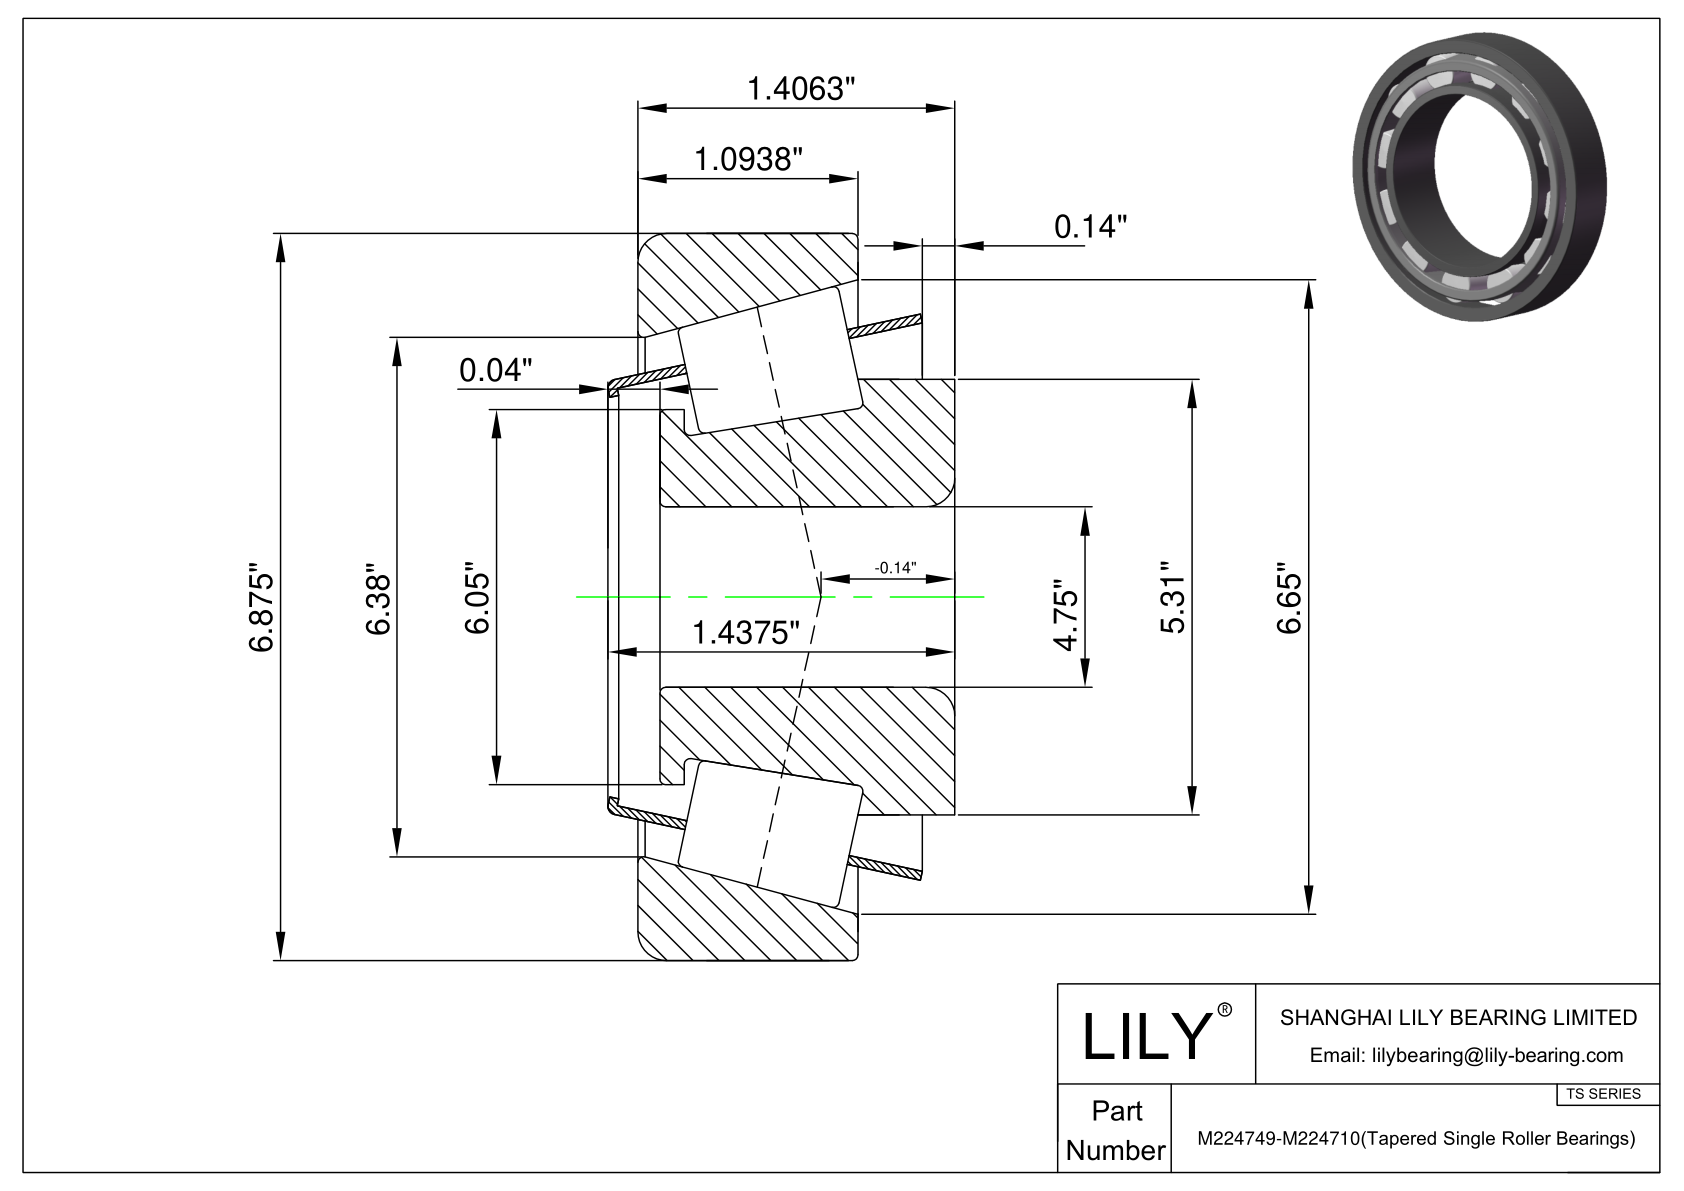 M224749-M224710 TS (Tapered Single Roller Bearings) (Imperial) cad drawing